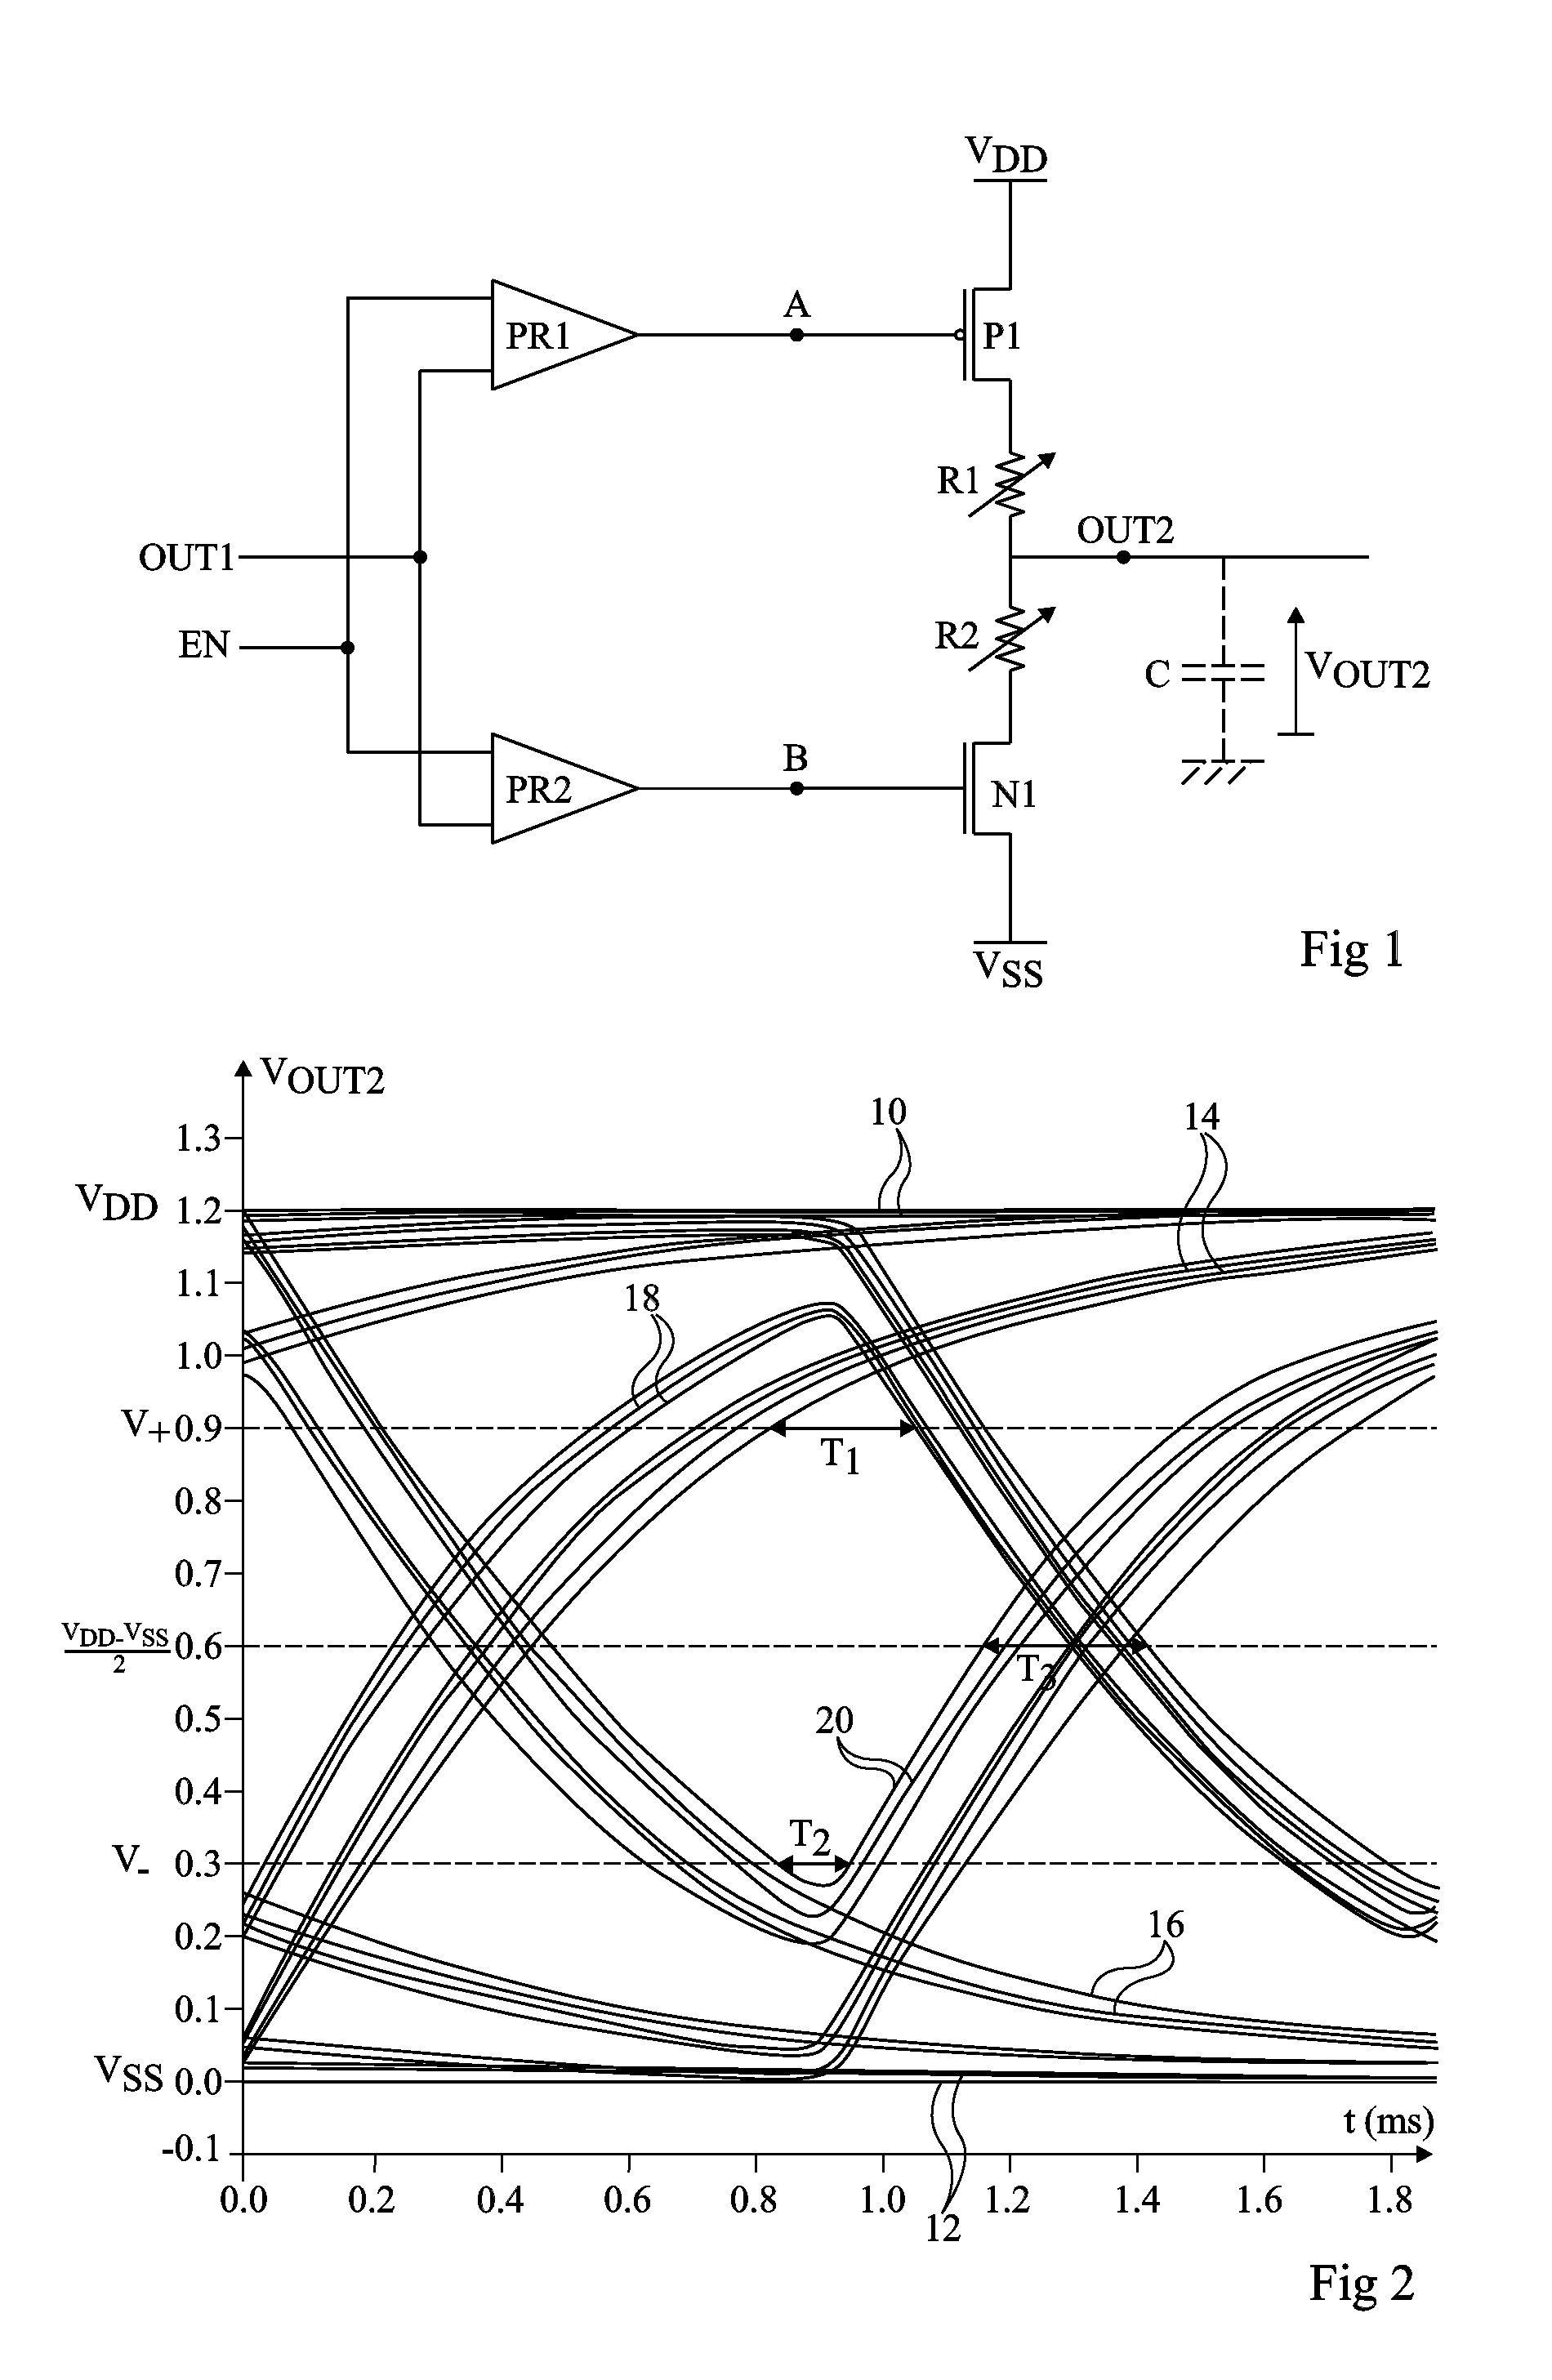 Buffer Circuit for a Capacitive Load of High Value